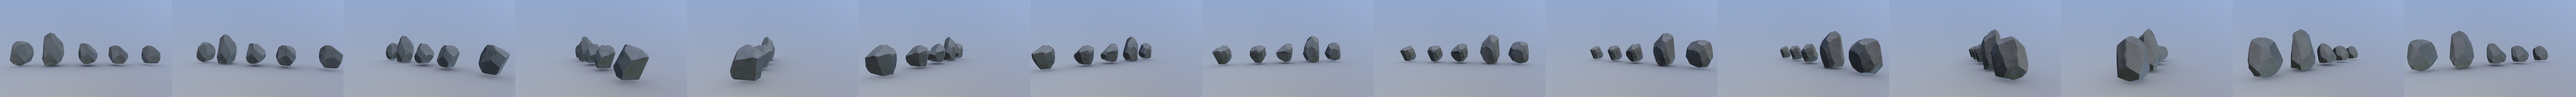 3D model PBR Iron Ingot Stacked and Single VR / AR / low-poly